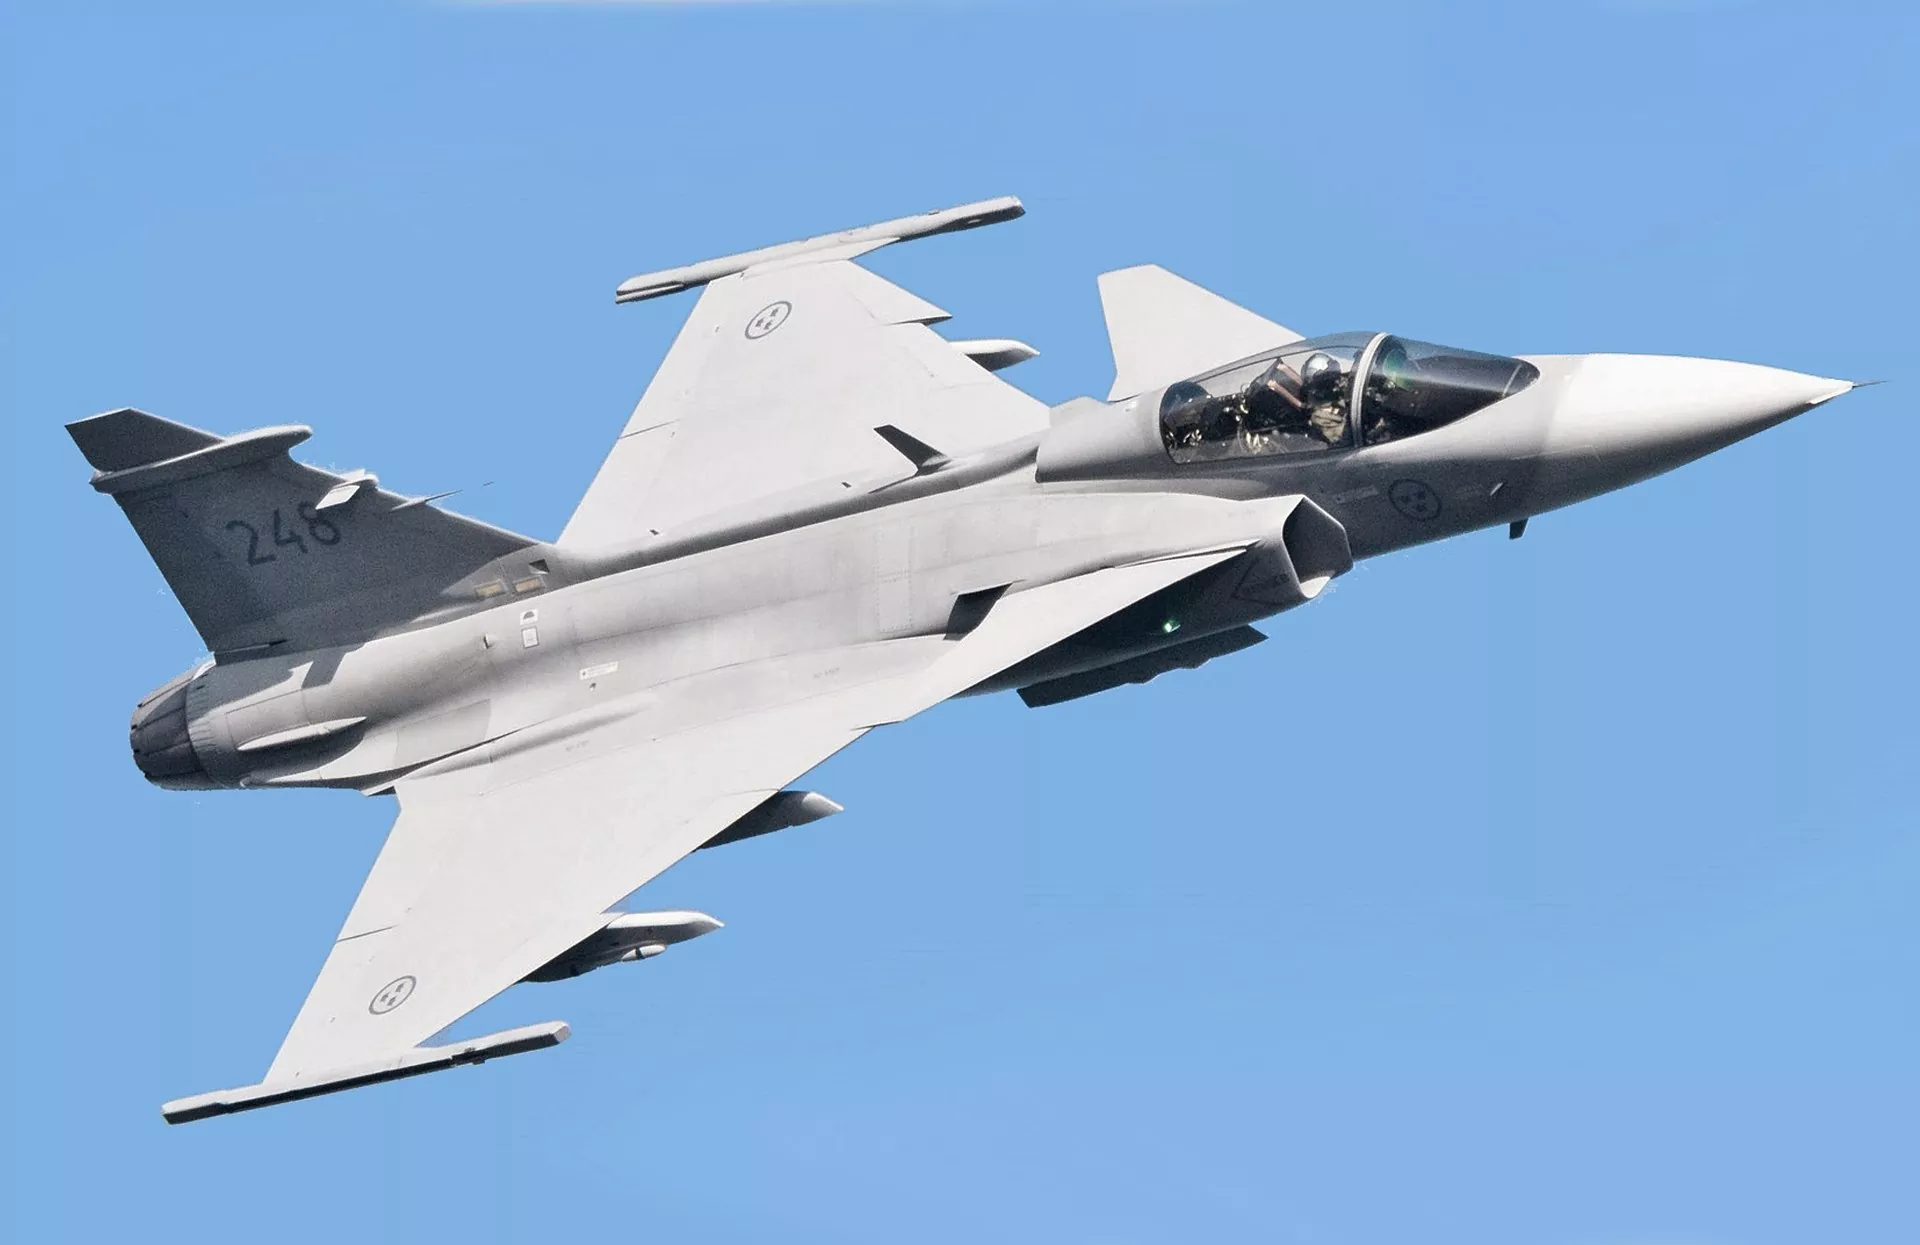 Swedish MP calls to allow selling SAAB JAS 39 Gripen fighter jets to Ukraine